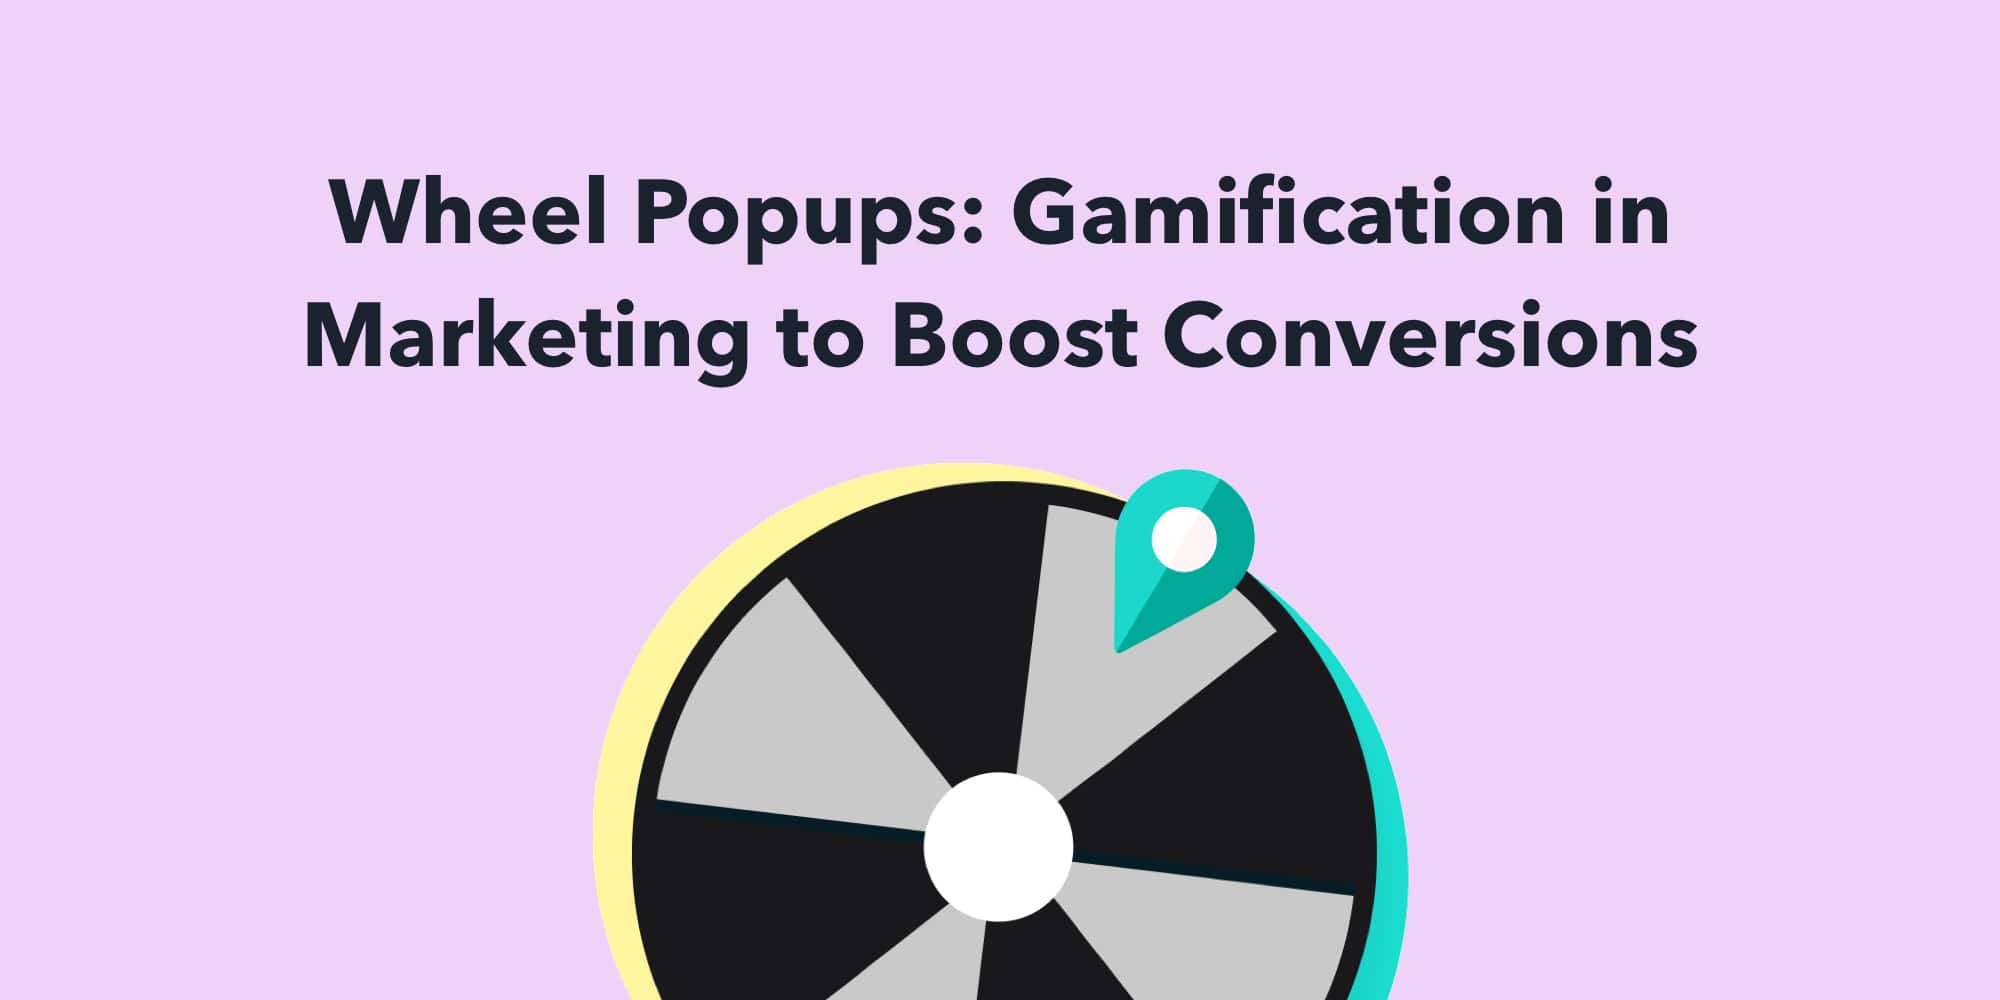 Wheel Popups: Gamification in Marketing to Boost Conversions